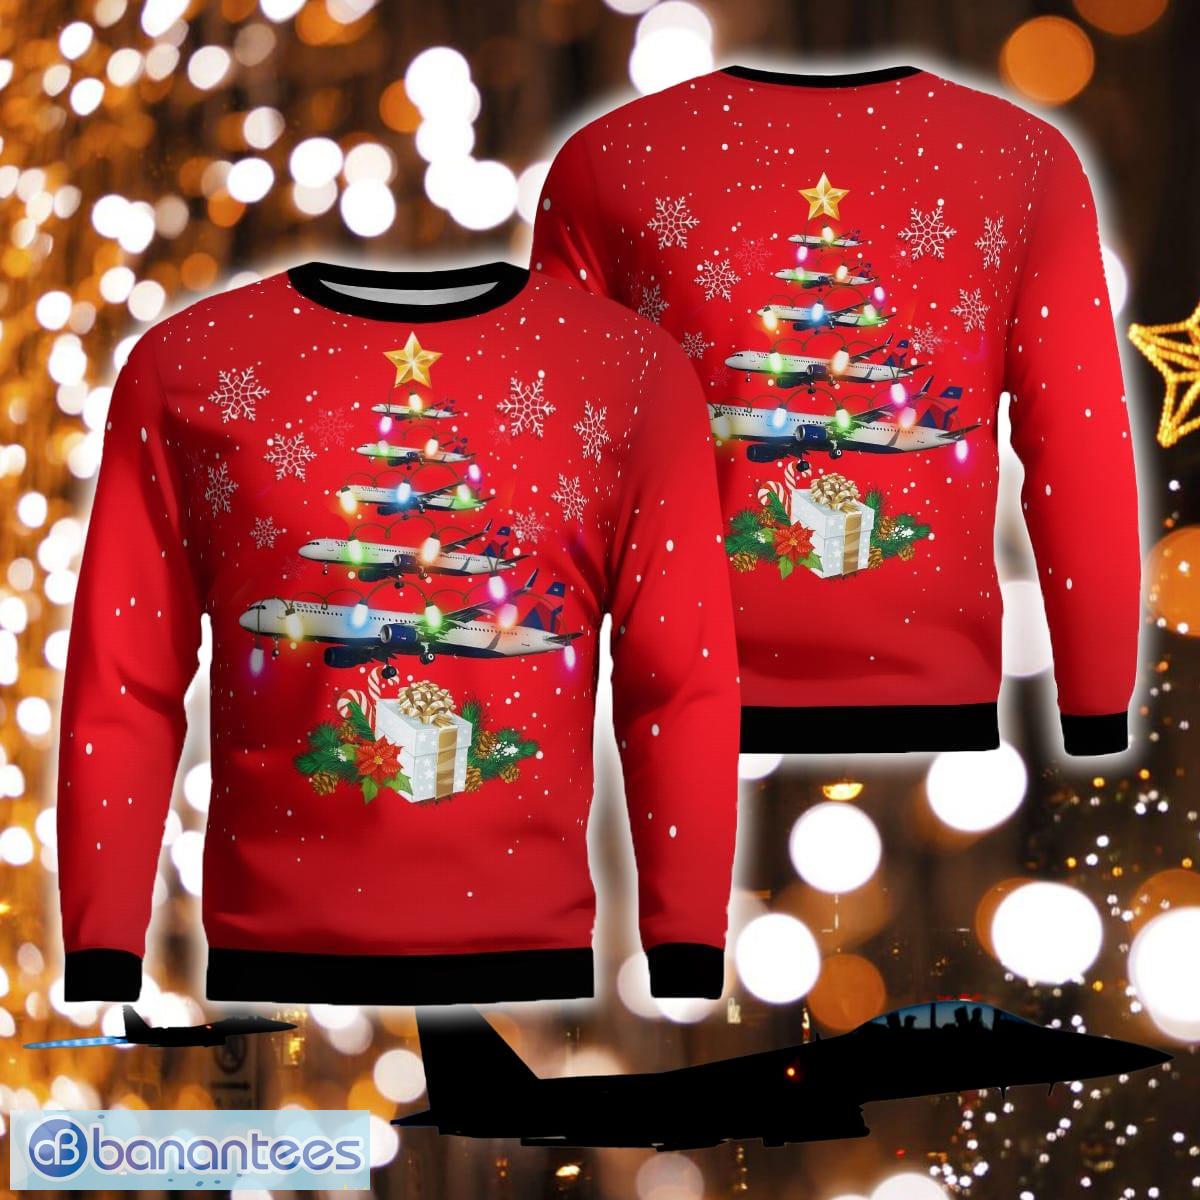 Delta Airlines Airbus A321-200 Ugly Christmas 3D Sweater - Delta Airlines Airbus A321-200 Ugly Christmas Sweater Photo 1